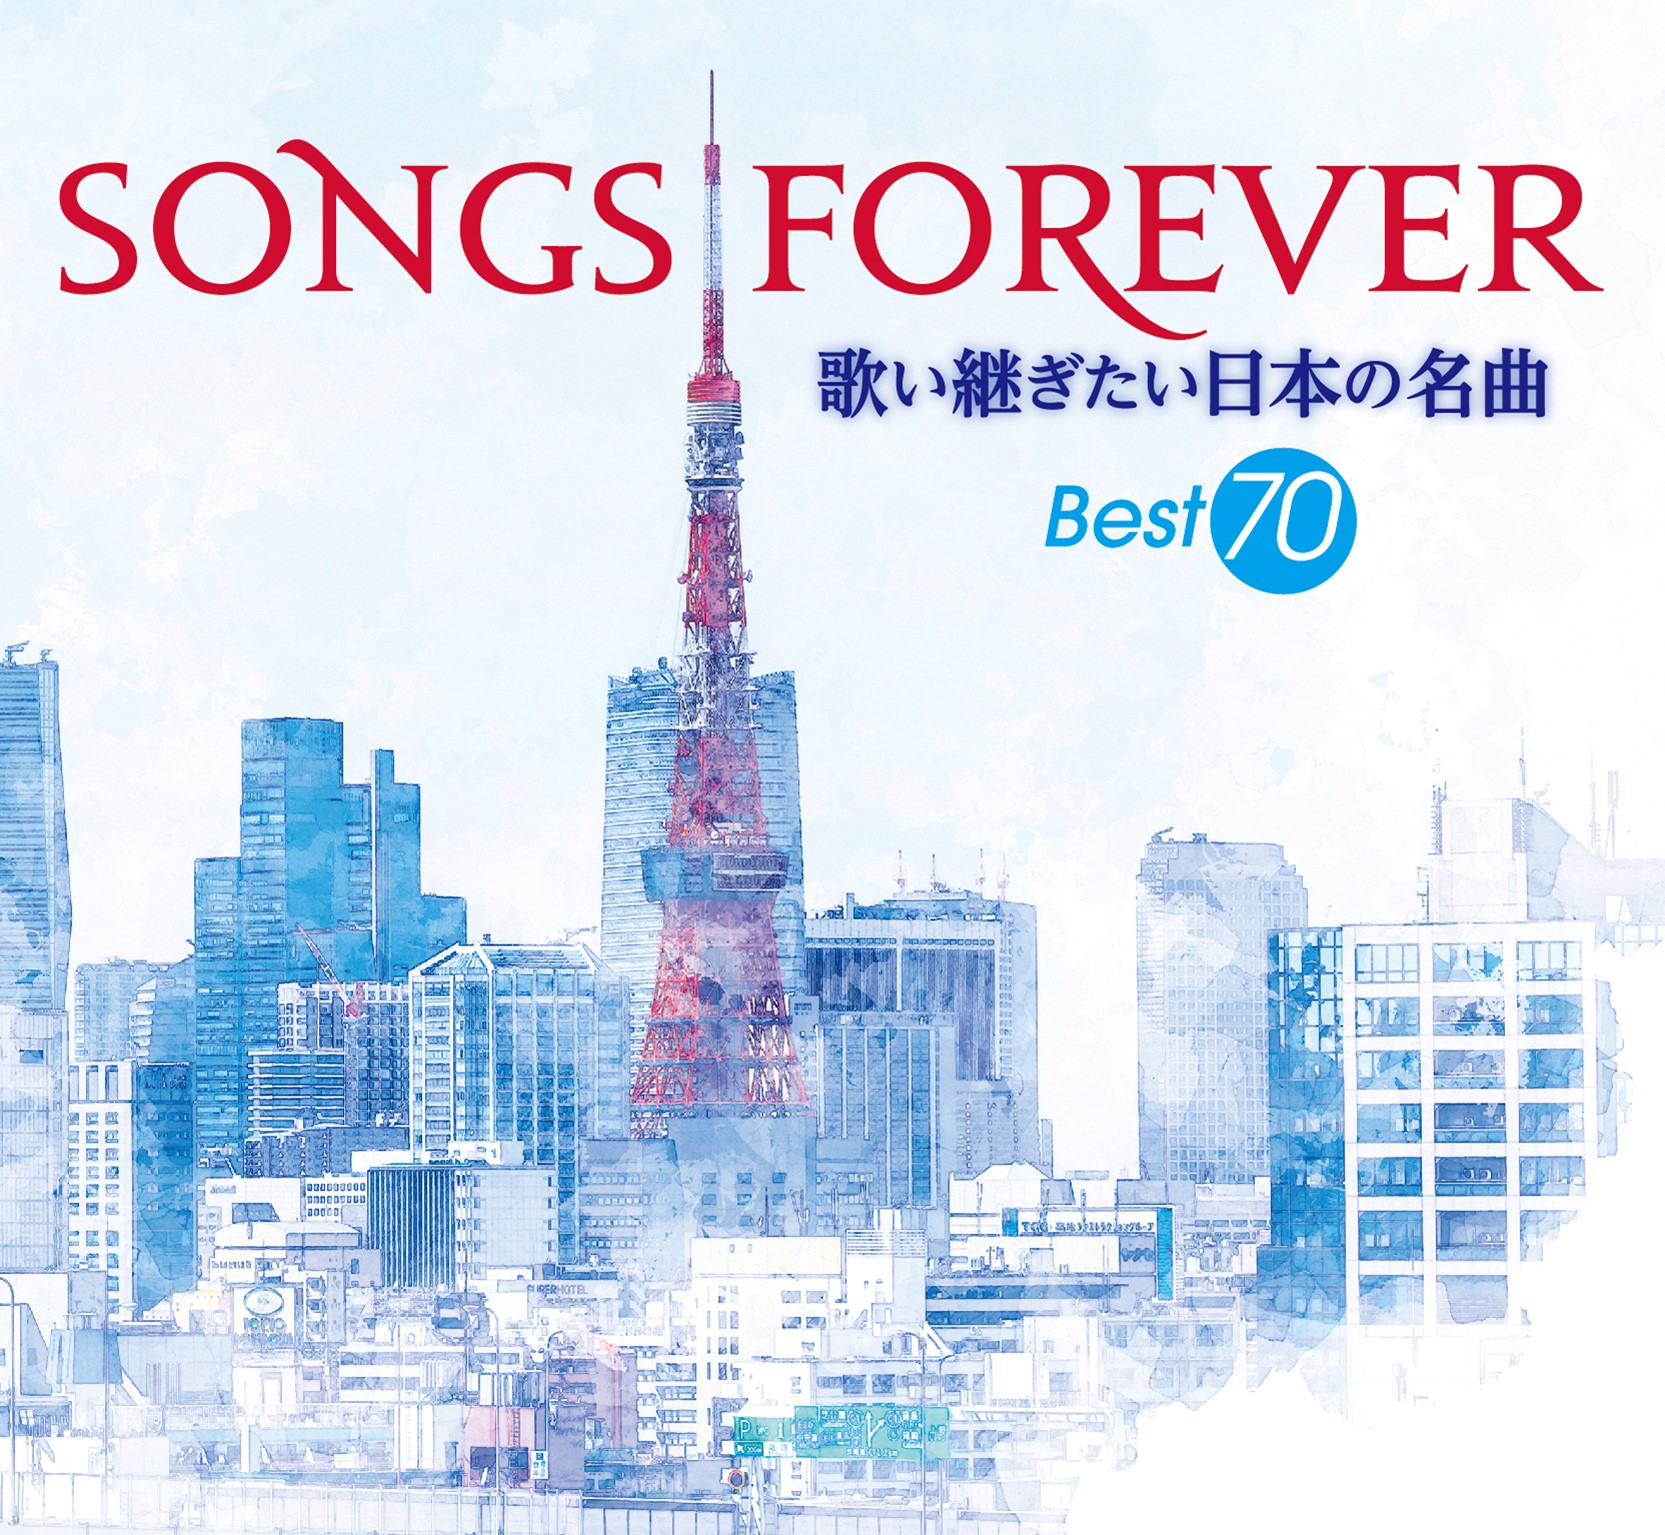 SONGS FOREVER 歌い継ぎたい日本の名曲 Best70 | kensysgas.com